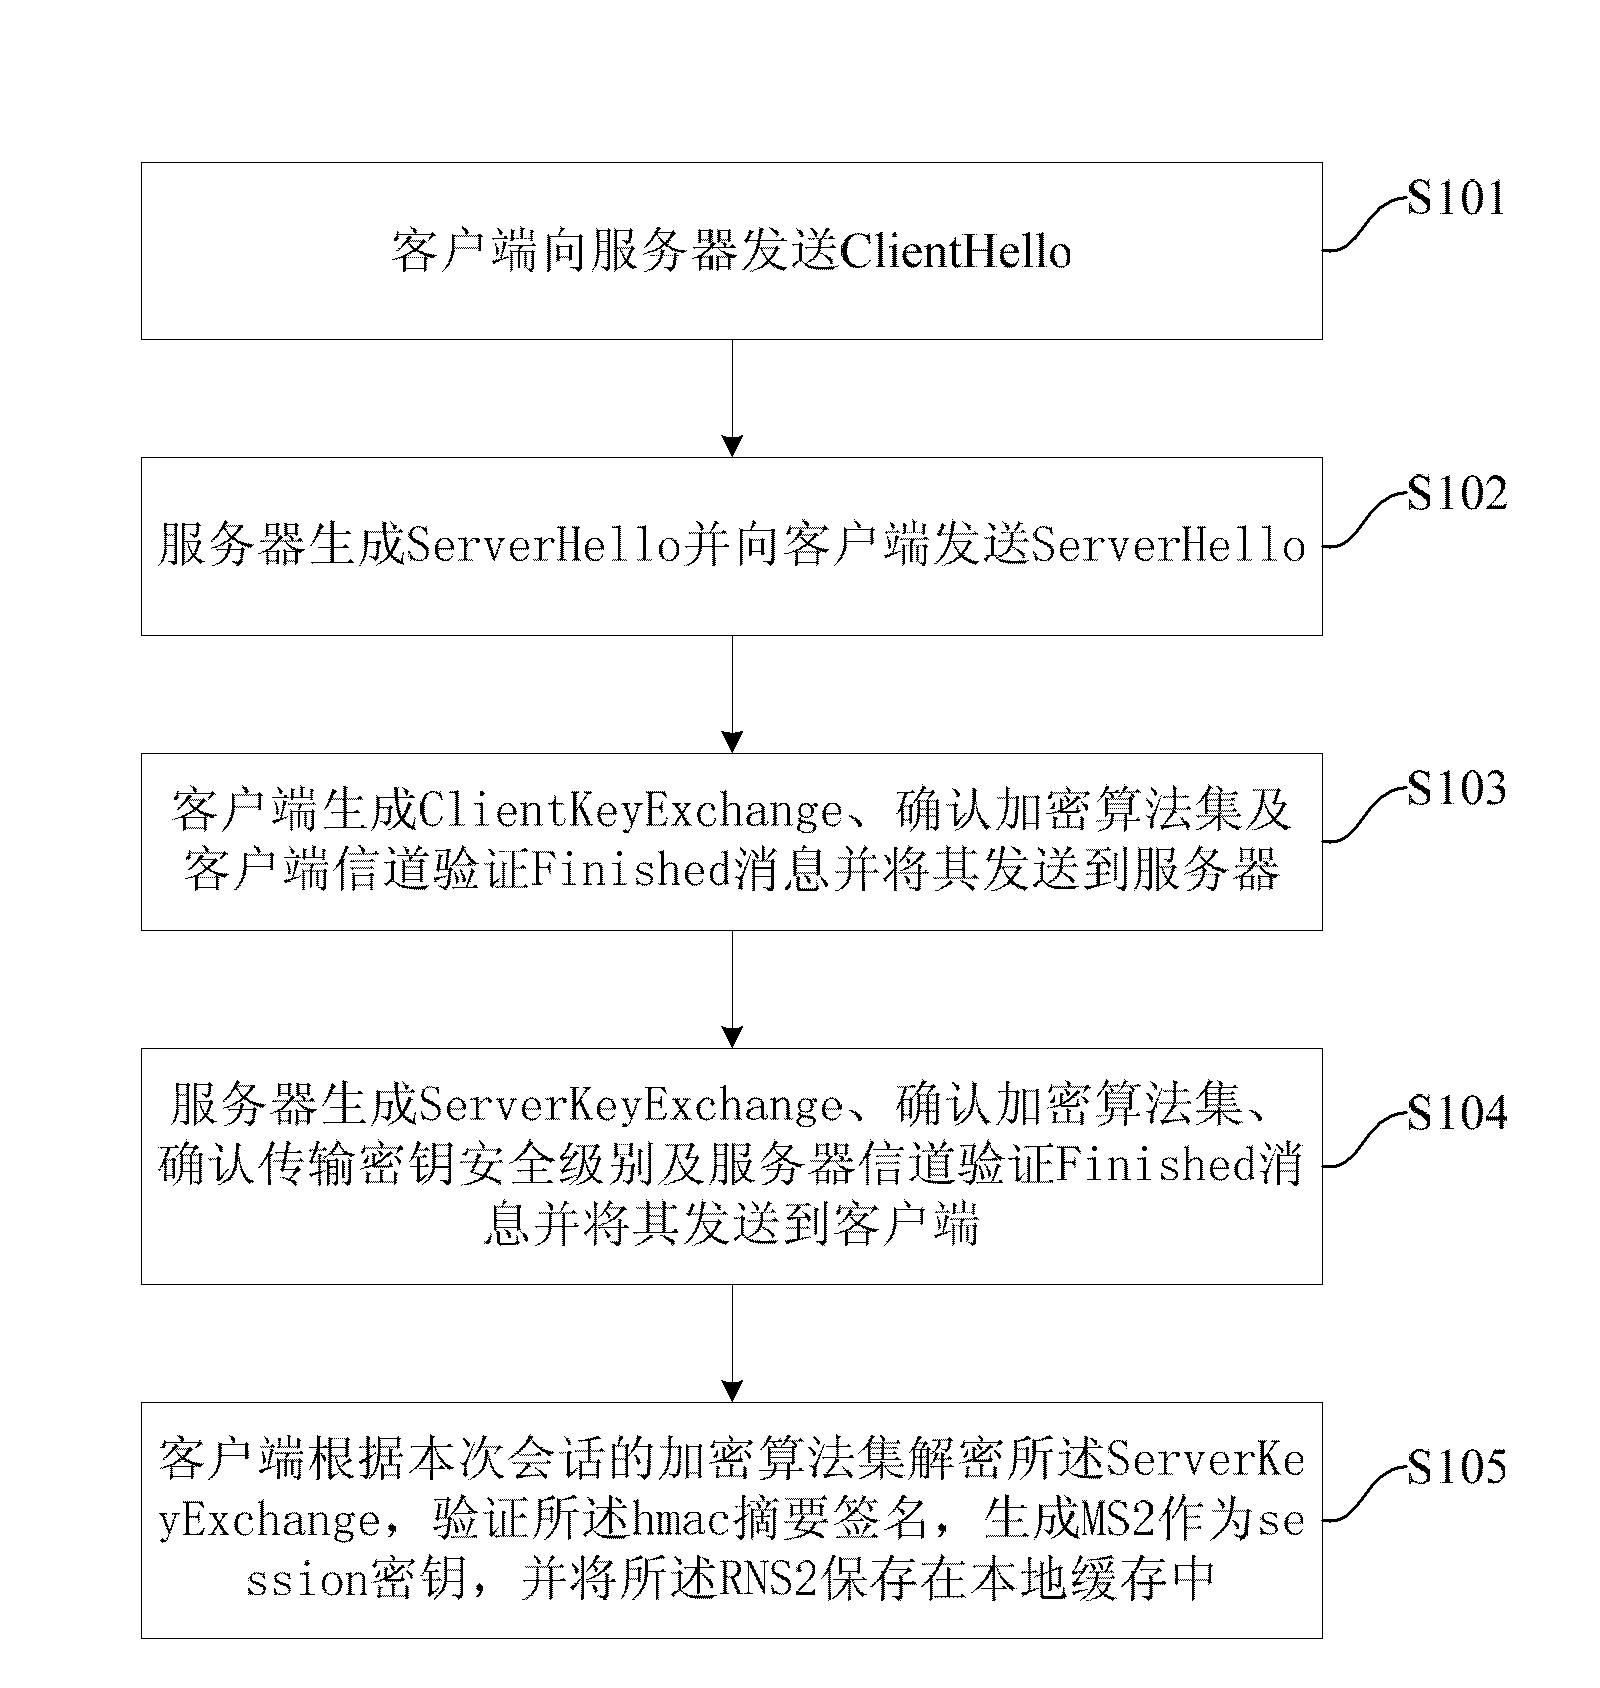 Method for encrypting channels and simplified method and system for encrypting channels based on HTTP (hyper text transport protocol)